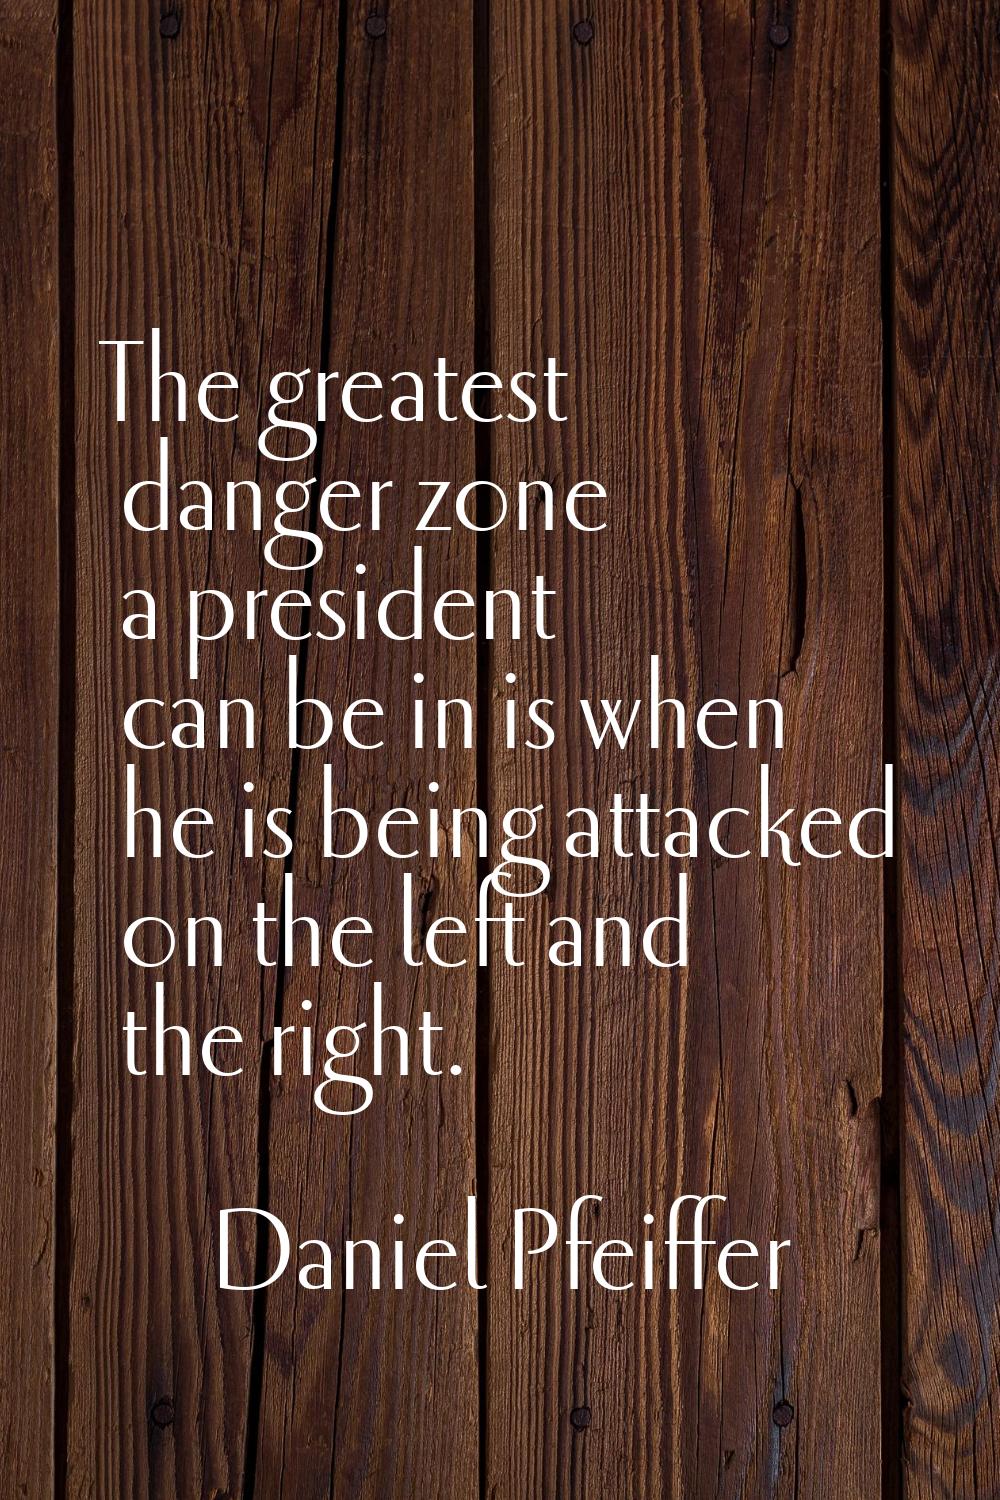 The greatest danger zone a president can be in is when he is being attacked on the left and the rig